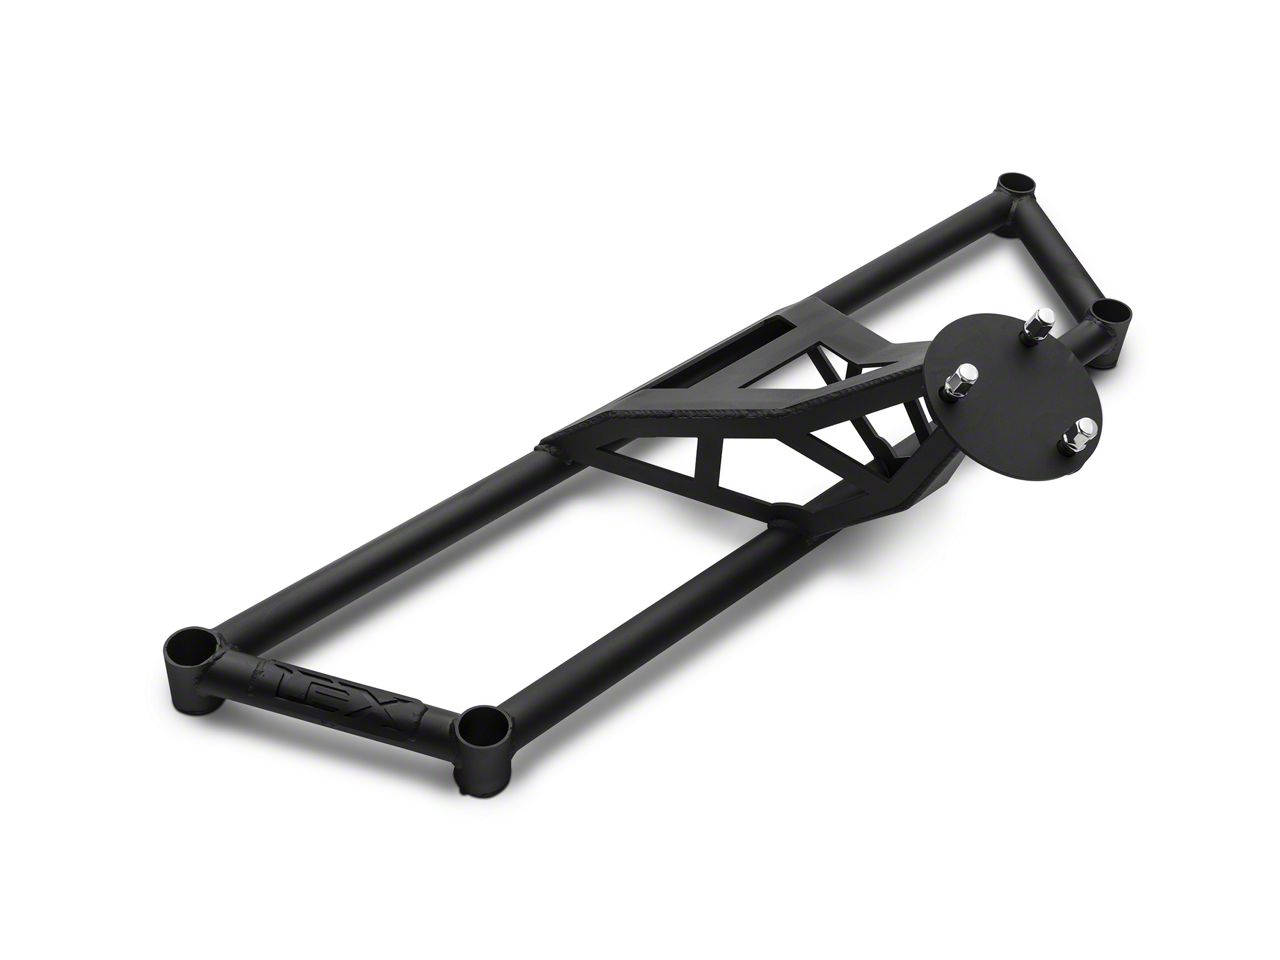 Ram 1500 Tire Carriers & Accessories 2002-2008